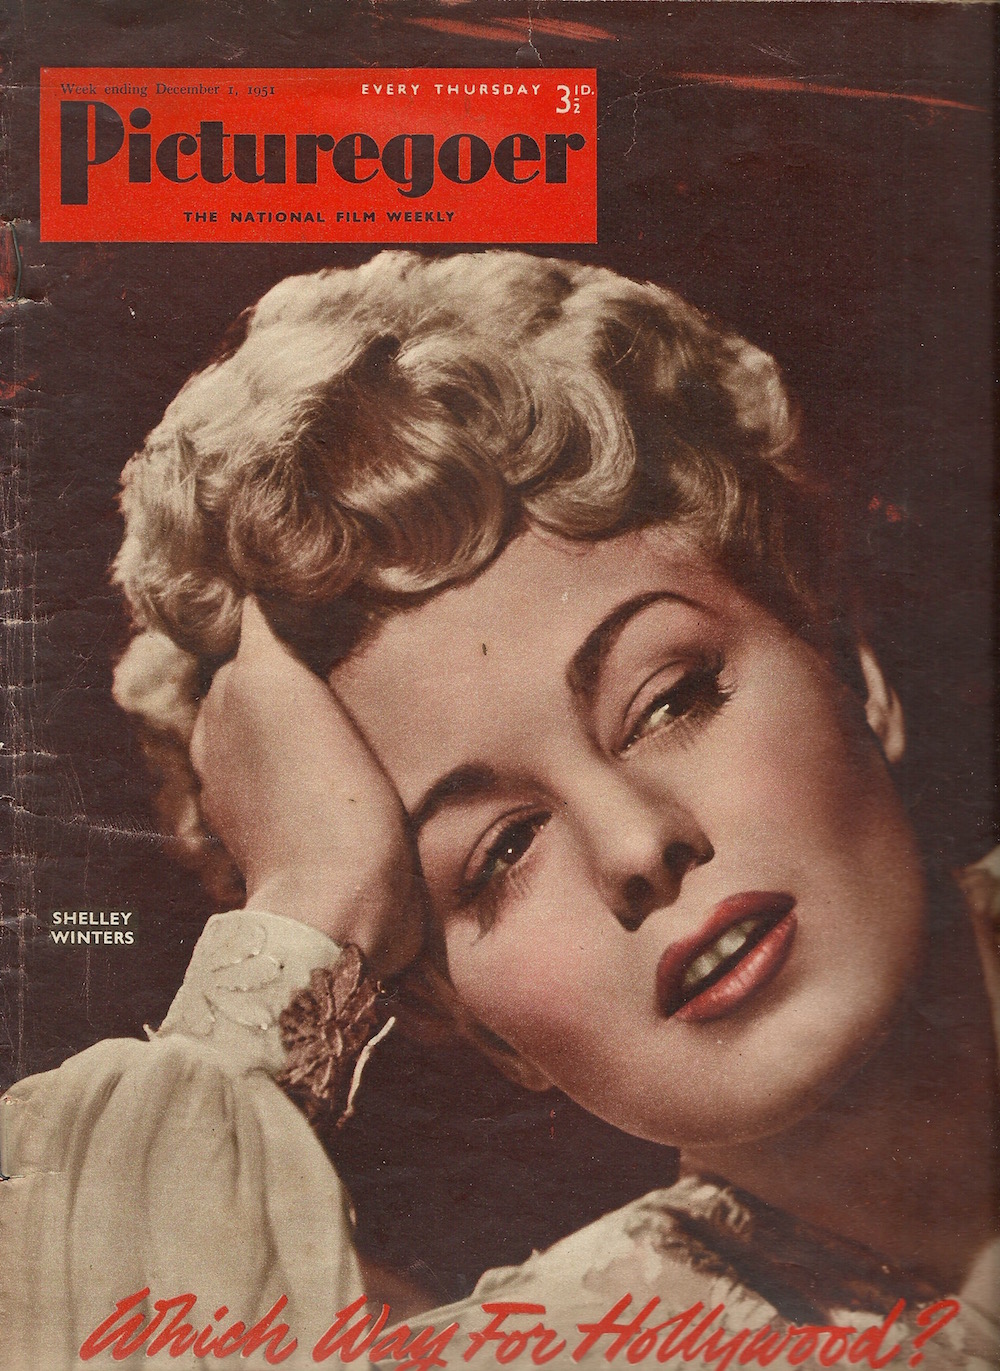 PIcturegoer 1 December 1953 Shelly Winters National Film Weekly No 865 Volume 22